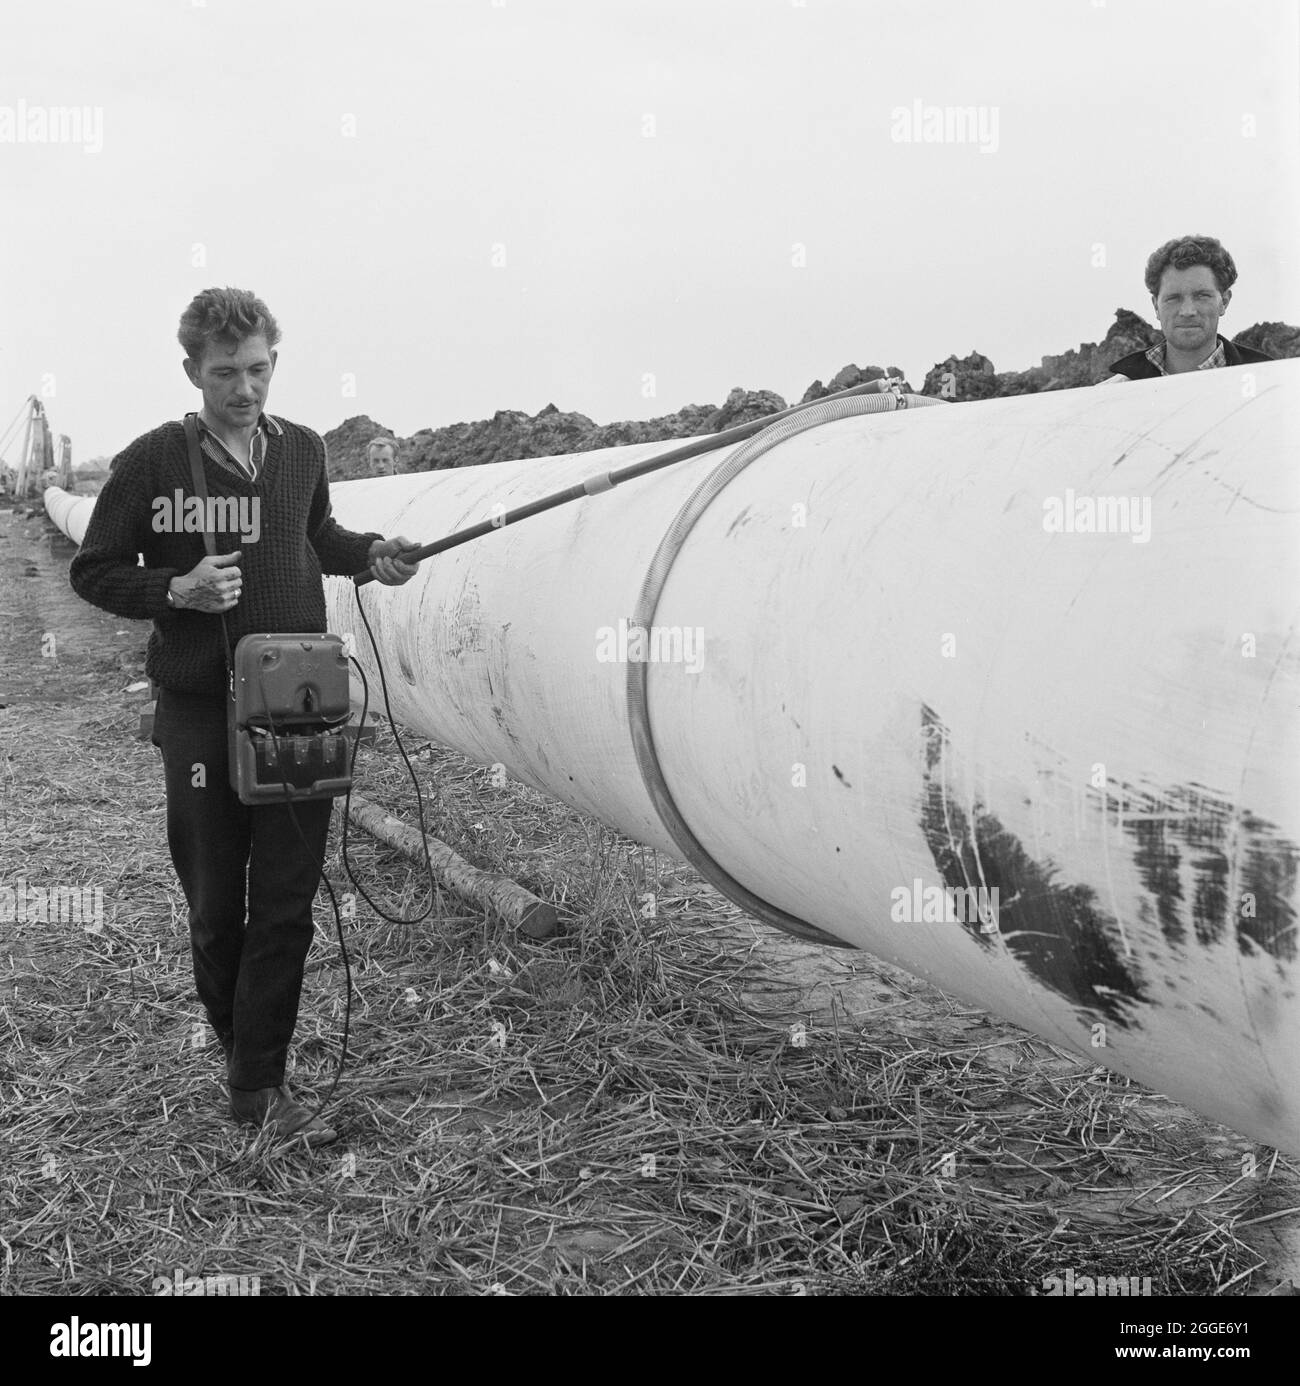 A worker walking along a section of the Fens gas pipeline, operating a holiday detector to check that the pipe is properly sealed with no faults in the wrapping around the pipe. Work on laying the Fens gas pipeline started in June 1967 and was a joint venture between Laing Civil Engineering and French companies Entrepose and Grands Travaux de Marseille (GTM) for the Gas Council. Over 600 men worked on the project to lay 36 inch diameter steel pipes starting at West Winch in Norfolk and running to where it linked up with the next contract at Woodcroft Castle in Cambridgeshire. The pipeline cros Stock Photo